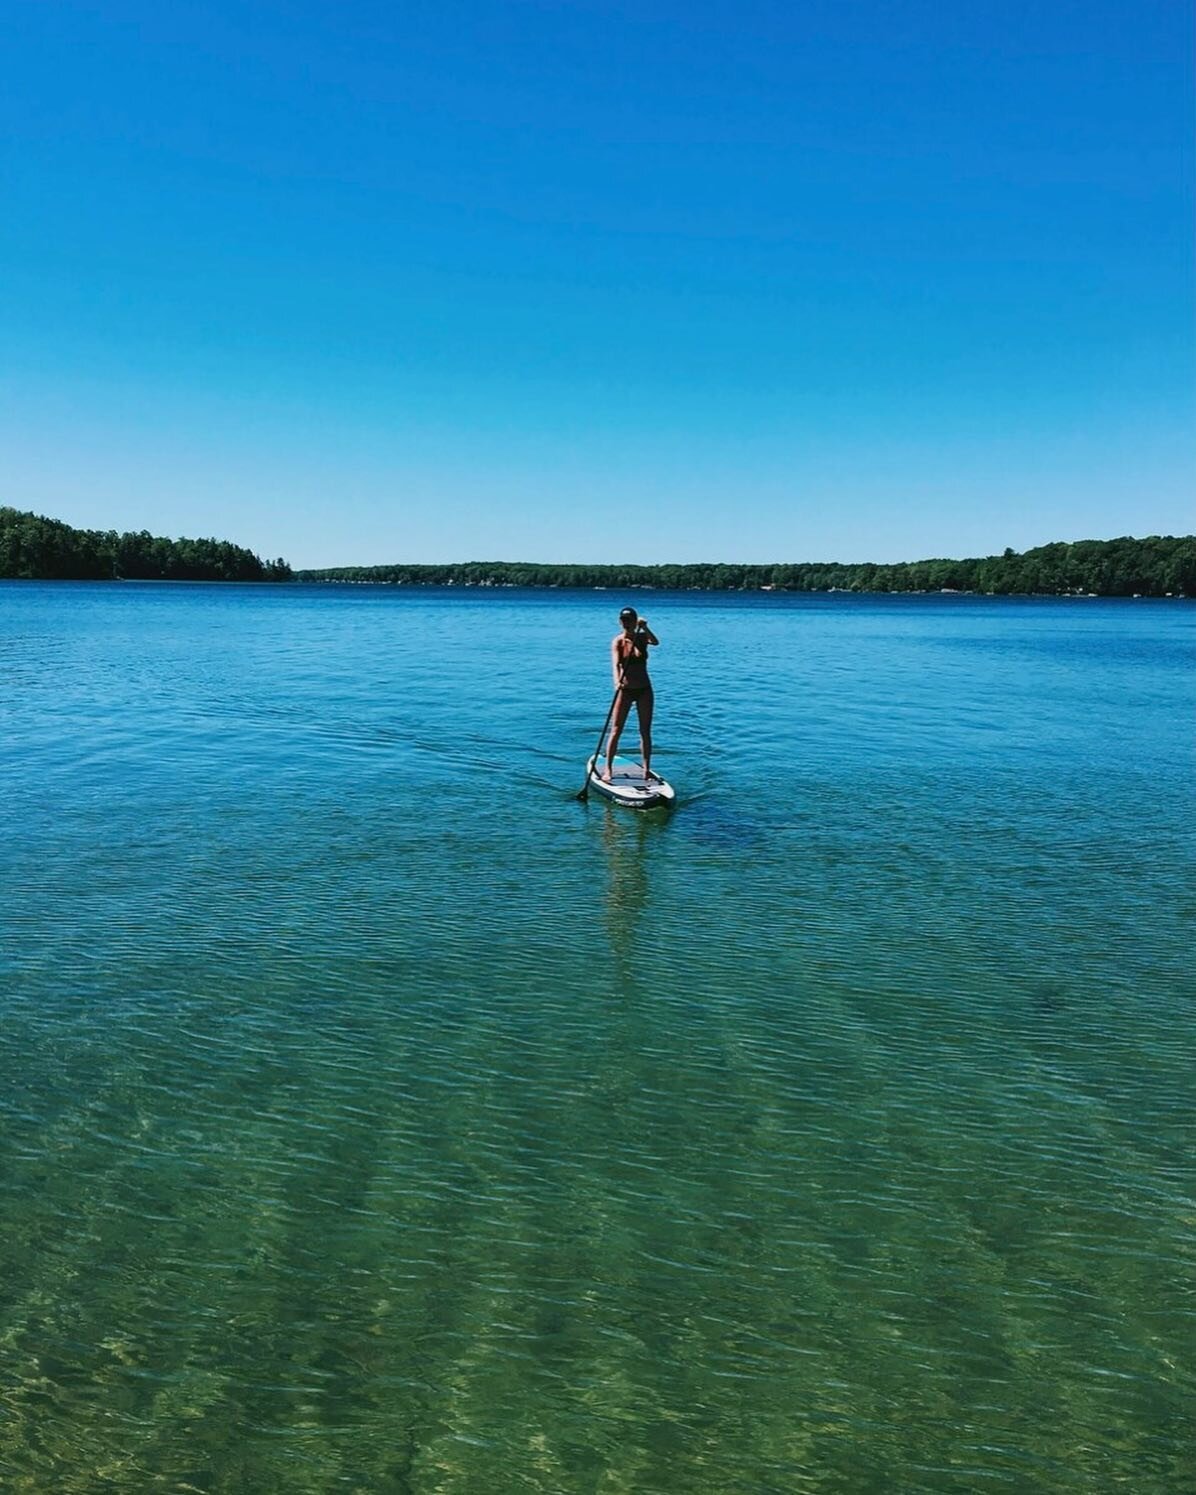 Anyone local to #norfolk 💙New Paddle Group Starting💙
Soooooo, one of the experiences I have discovered over LD, like many, is paddle boarding!
SUP is a true reminder of the exterior Prana as you stand up on the shifting density of water, and a true